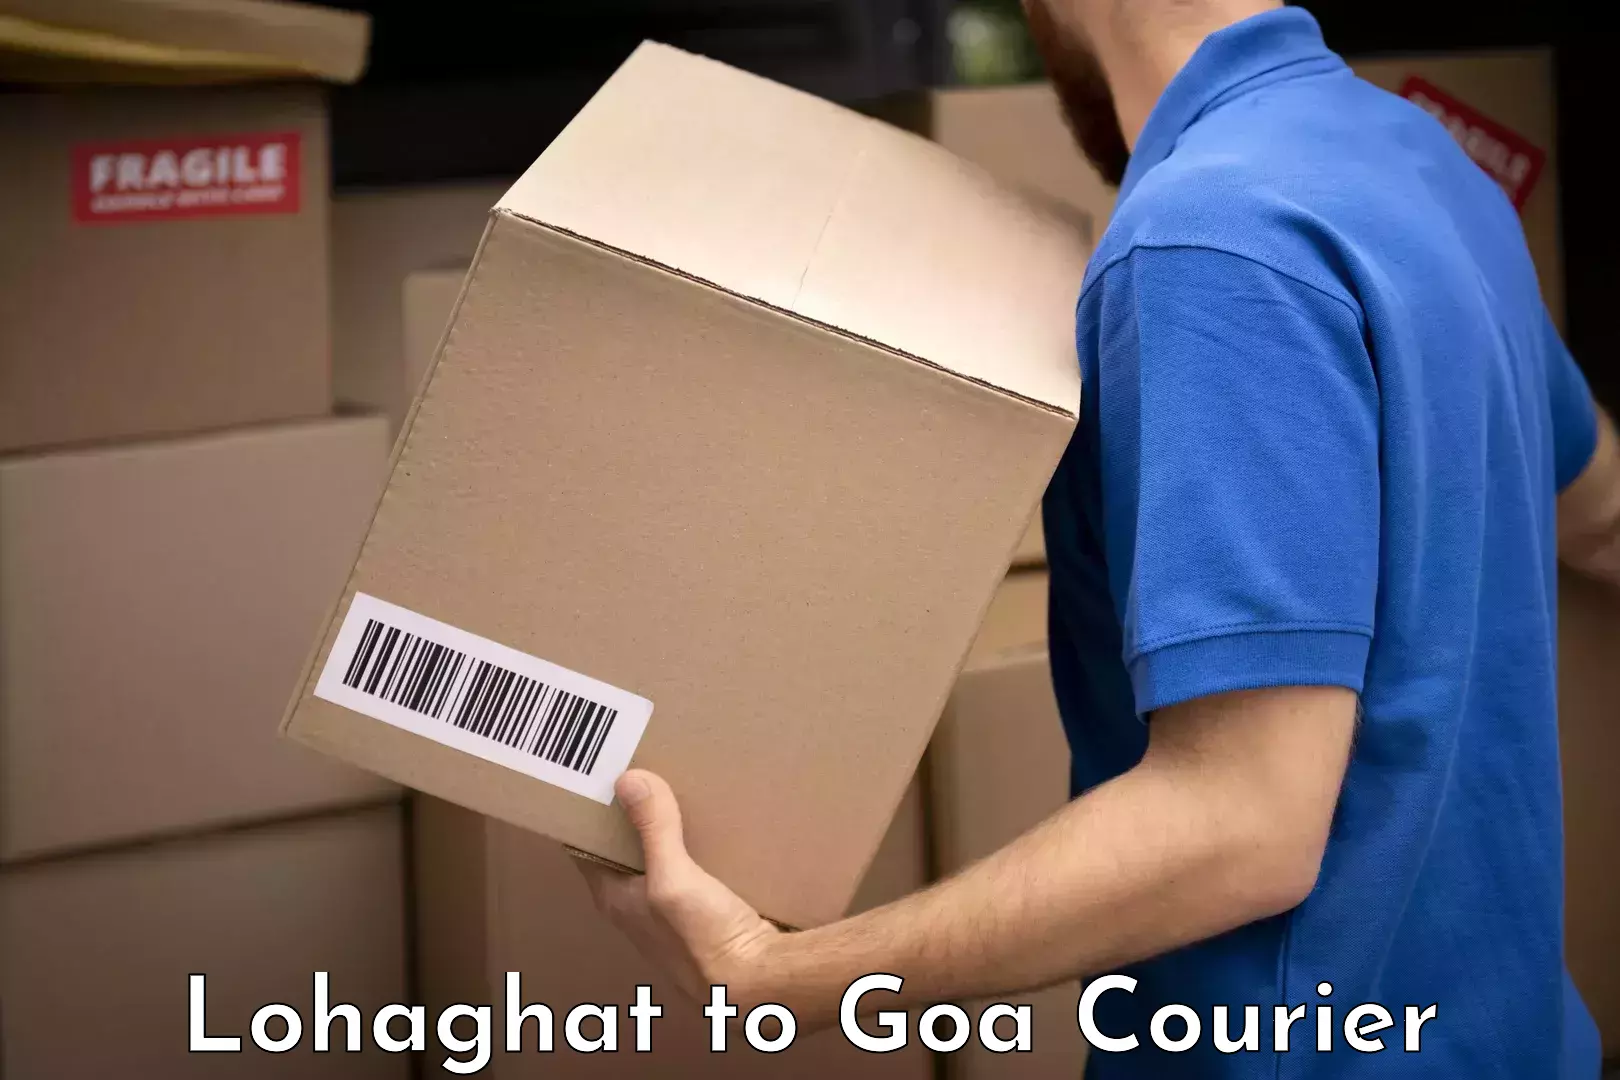 Luggage shipment specialists Lohaghat to South Goa